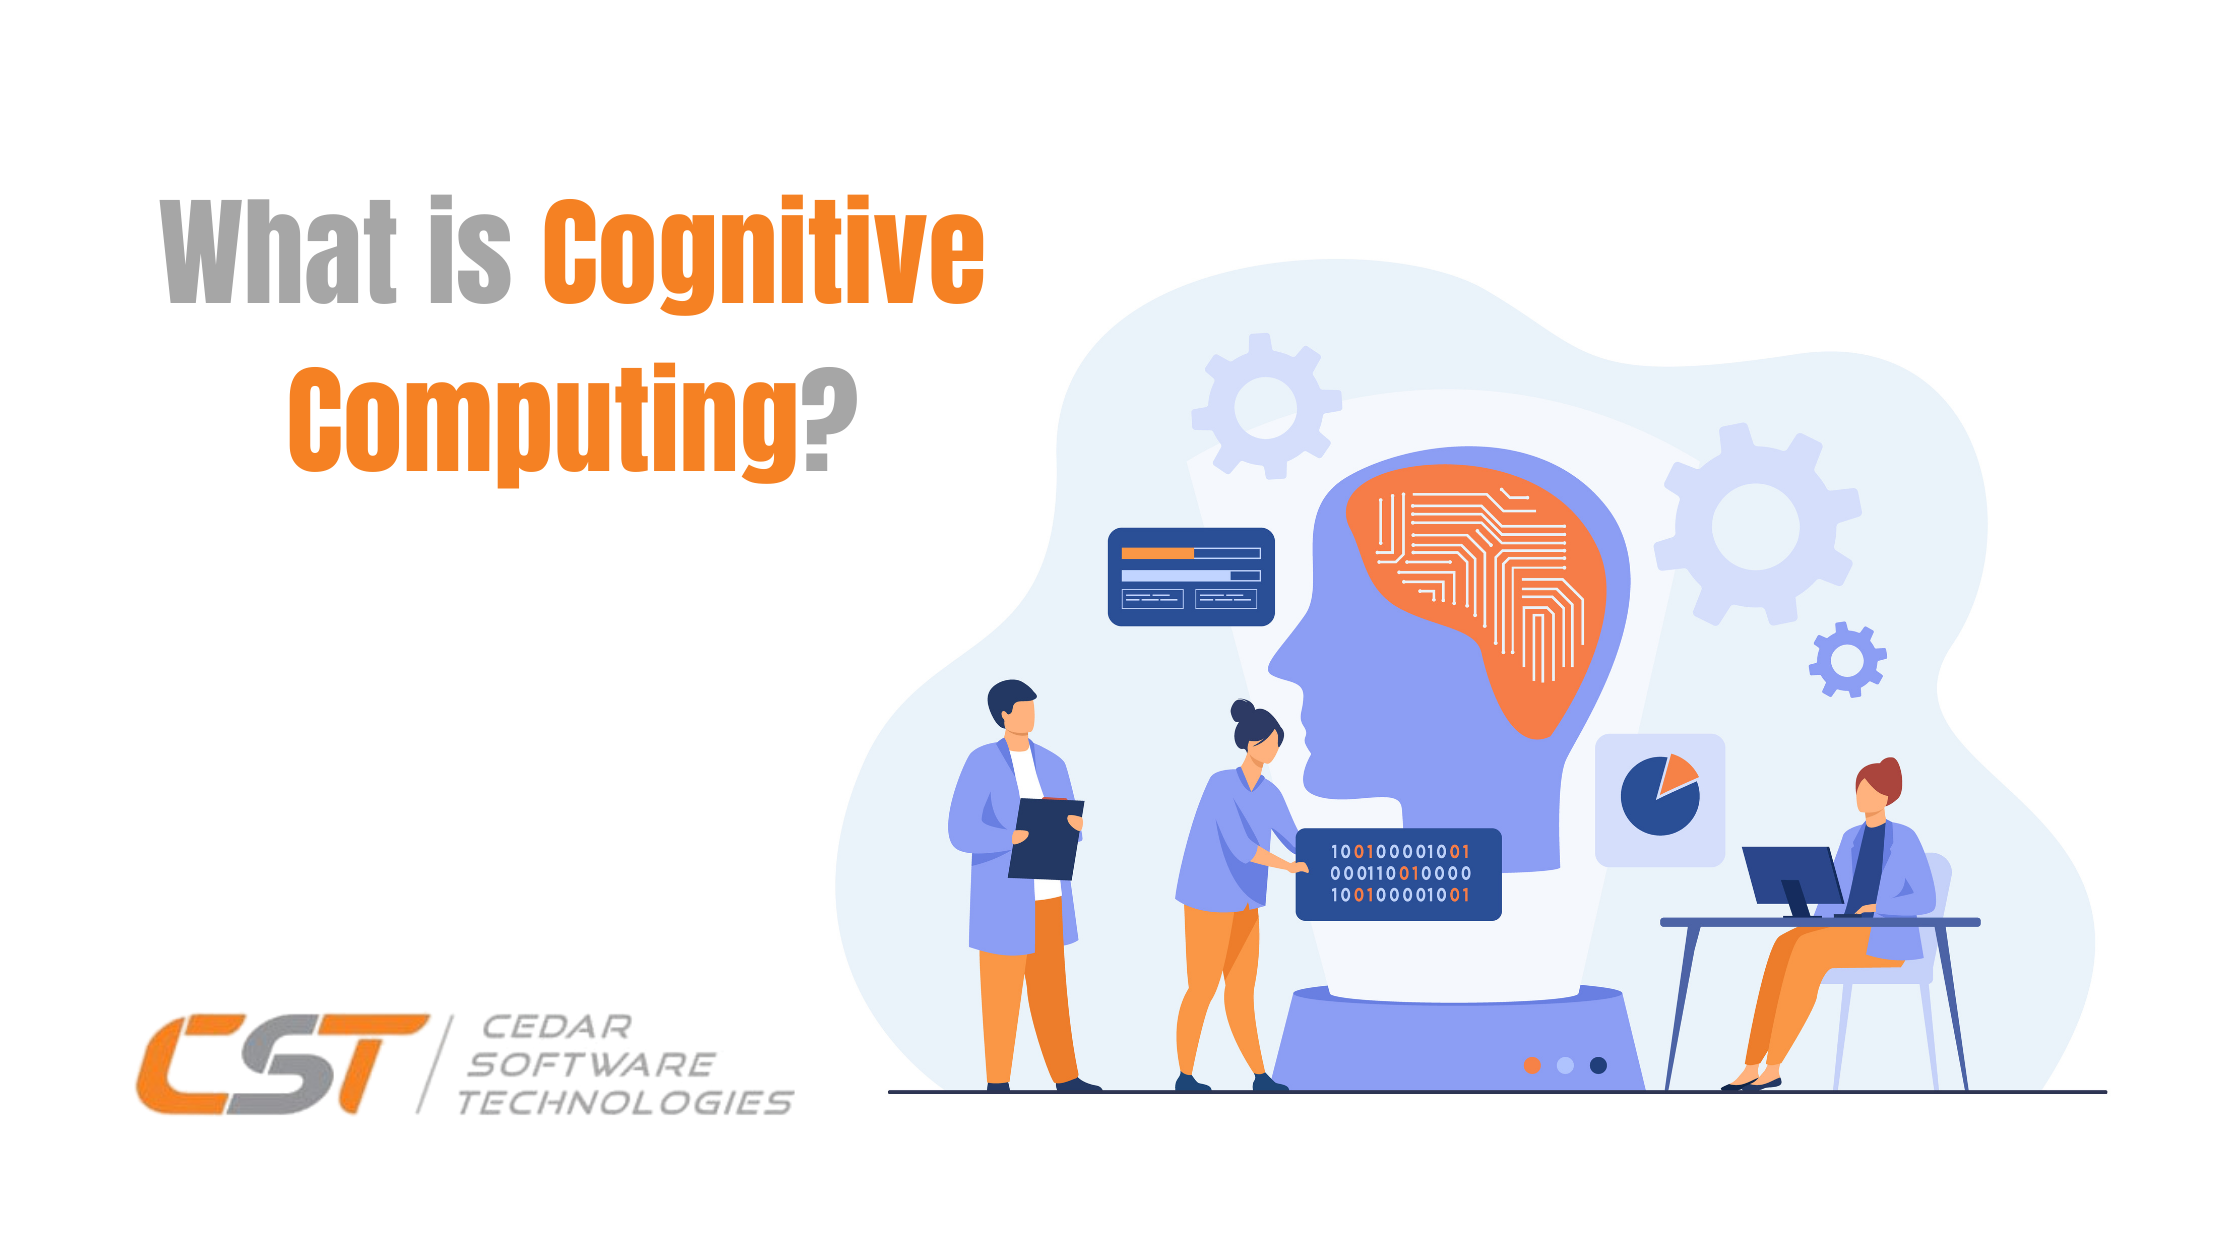 What is Cognitive Computing?